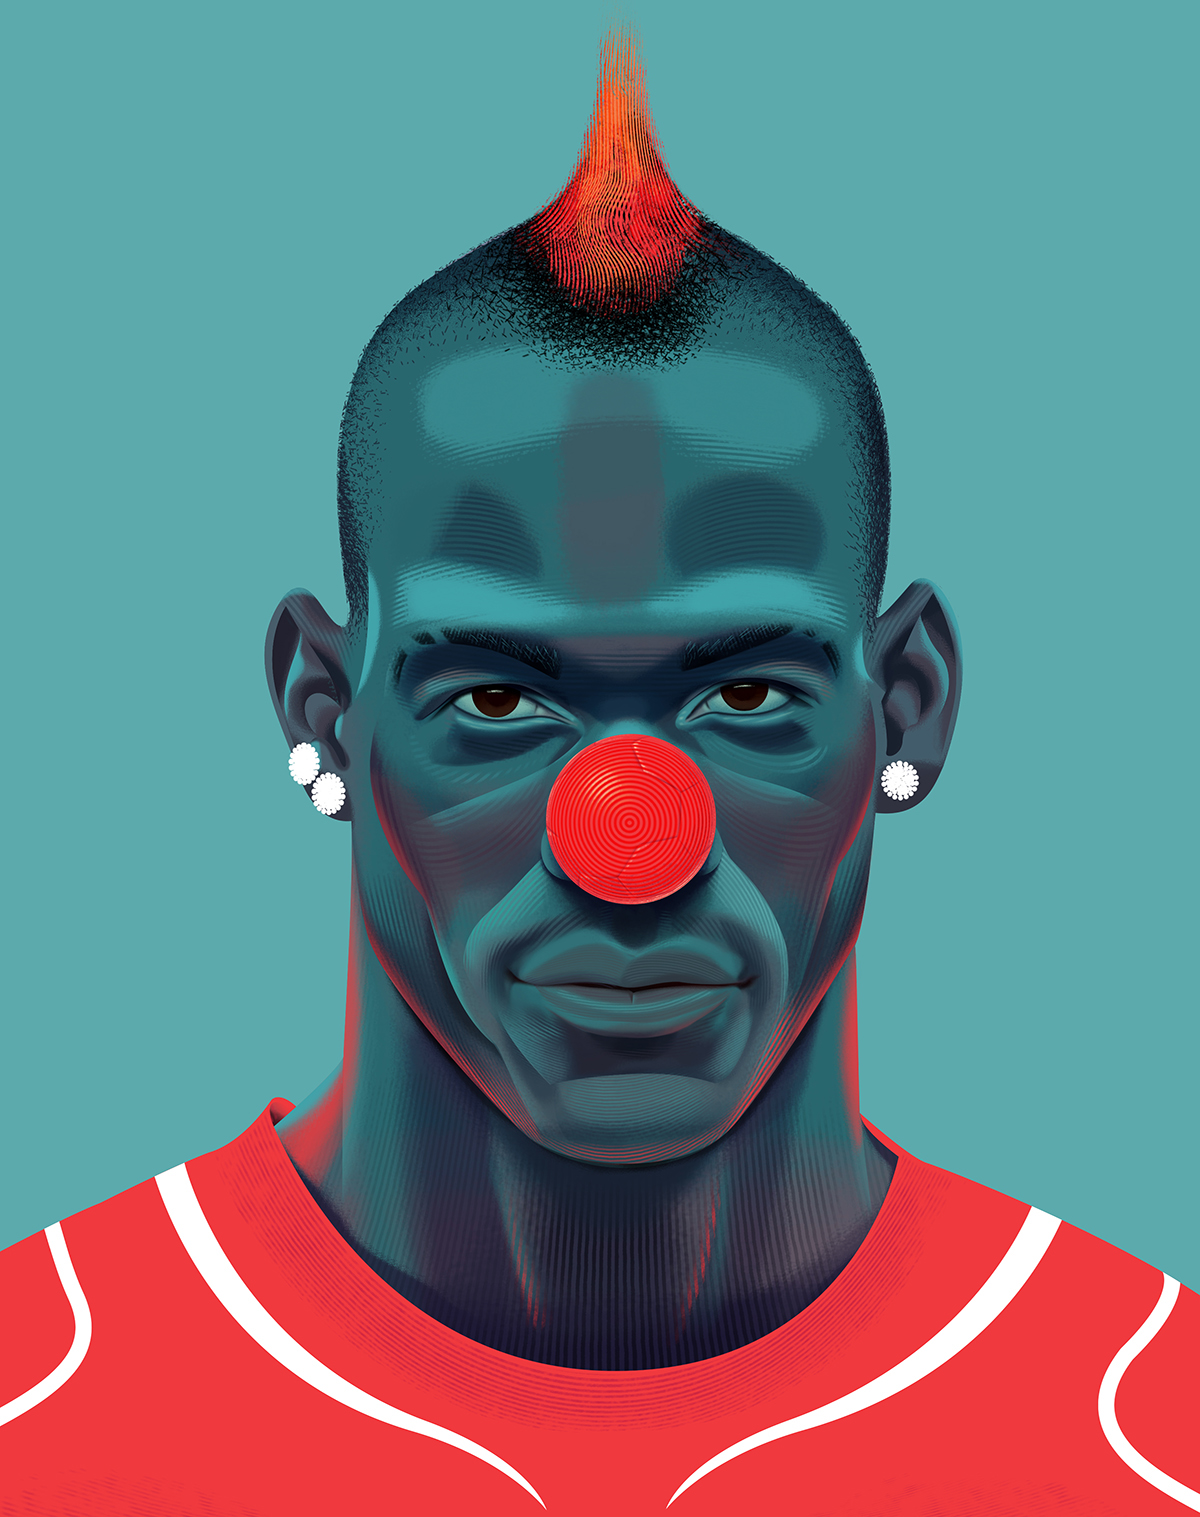 Diego Costa david foster wallace balotelli 8by8 Leaders Edge